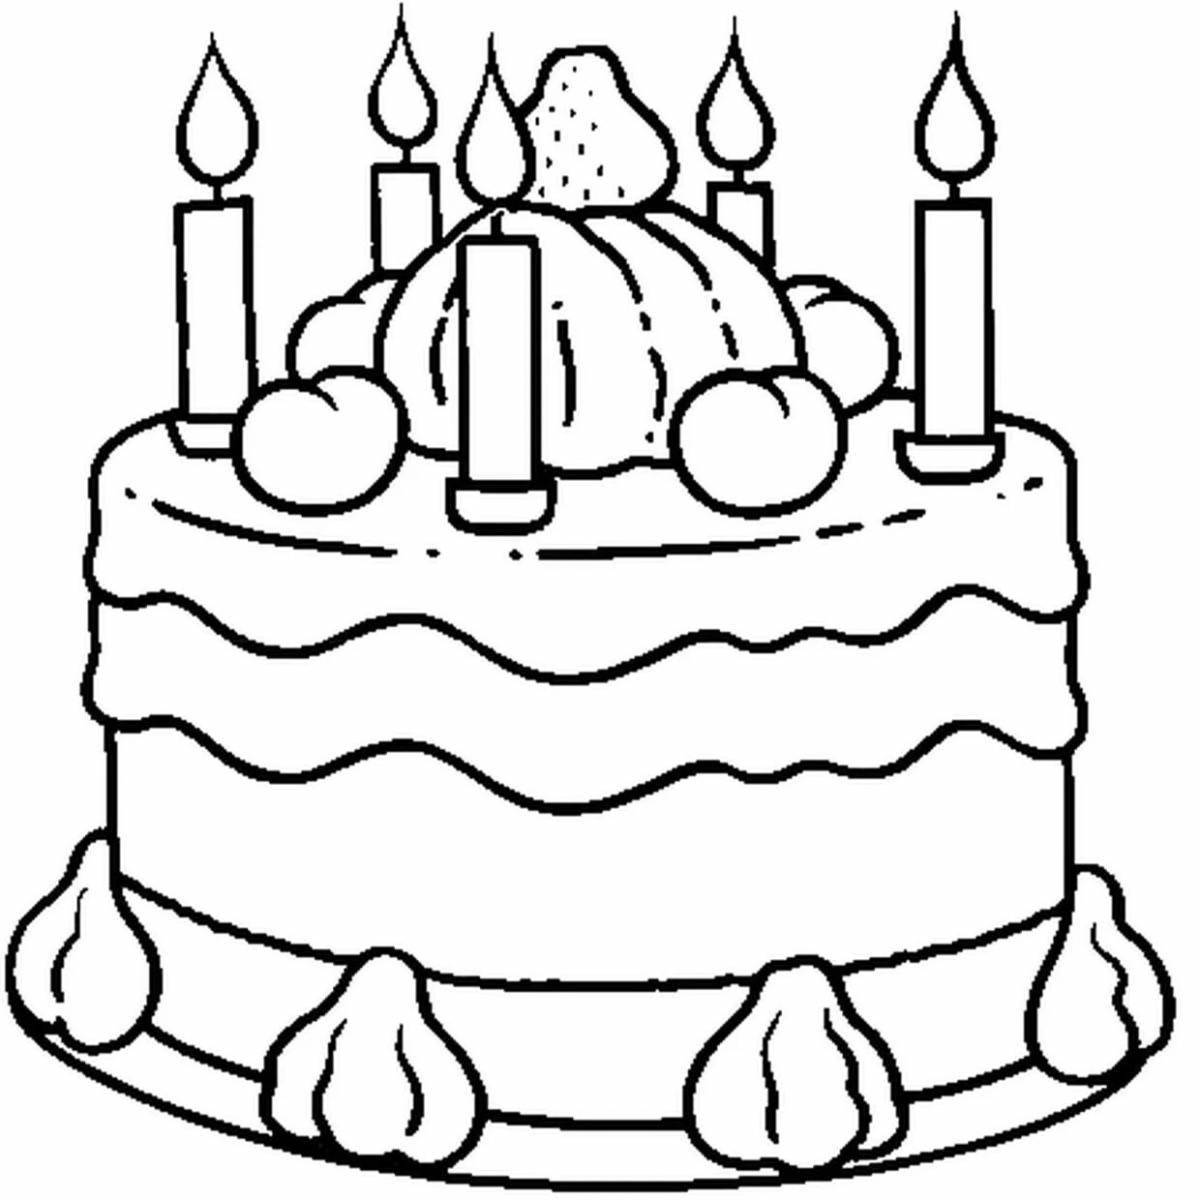 Shining cake coloring book for kids